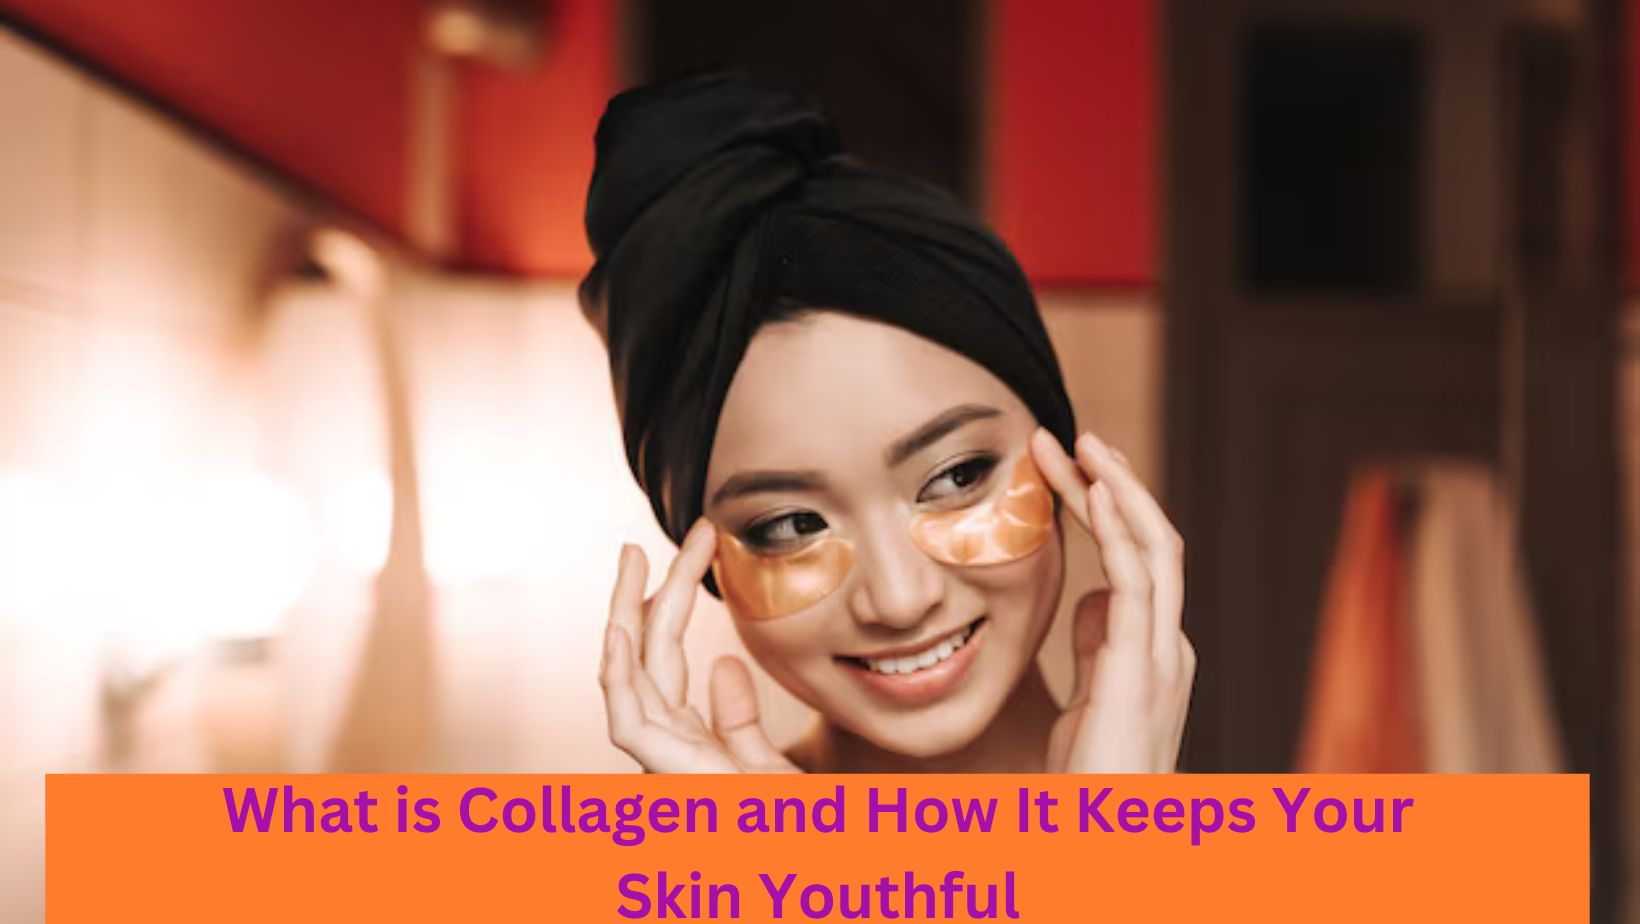 What Is Collagen And How It Keeps Your Skin Youthful?